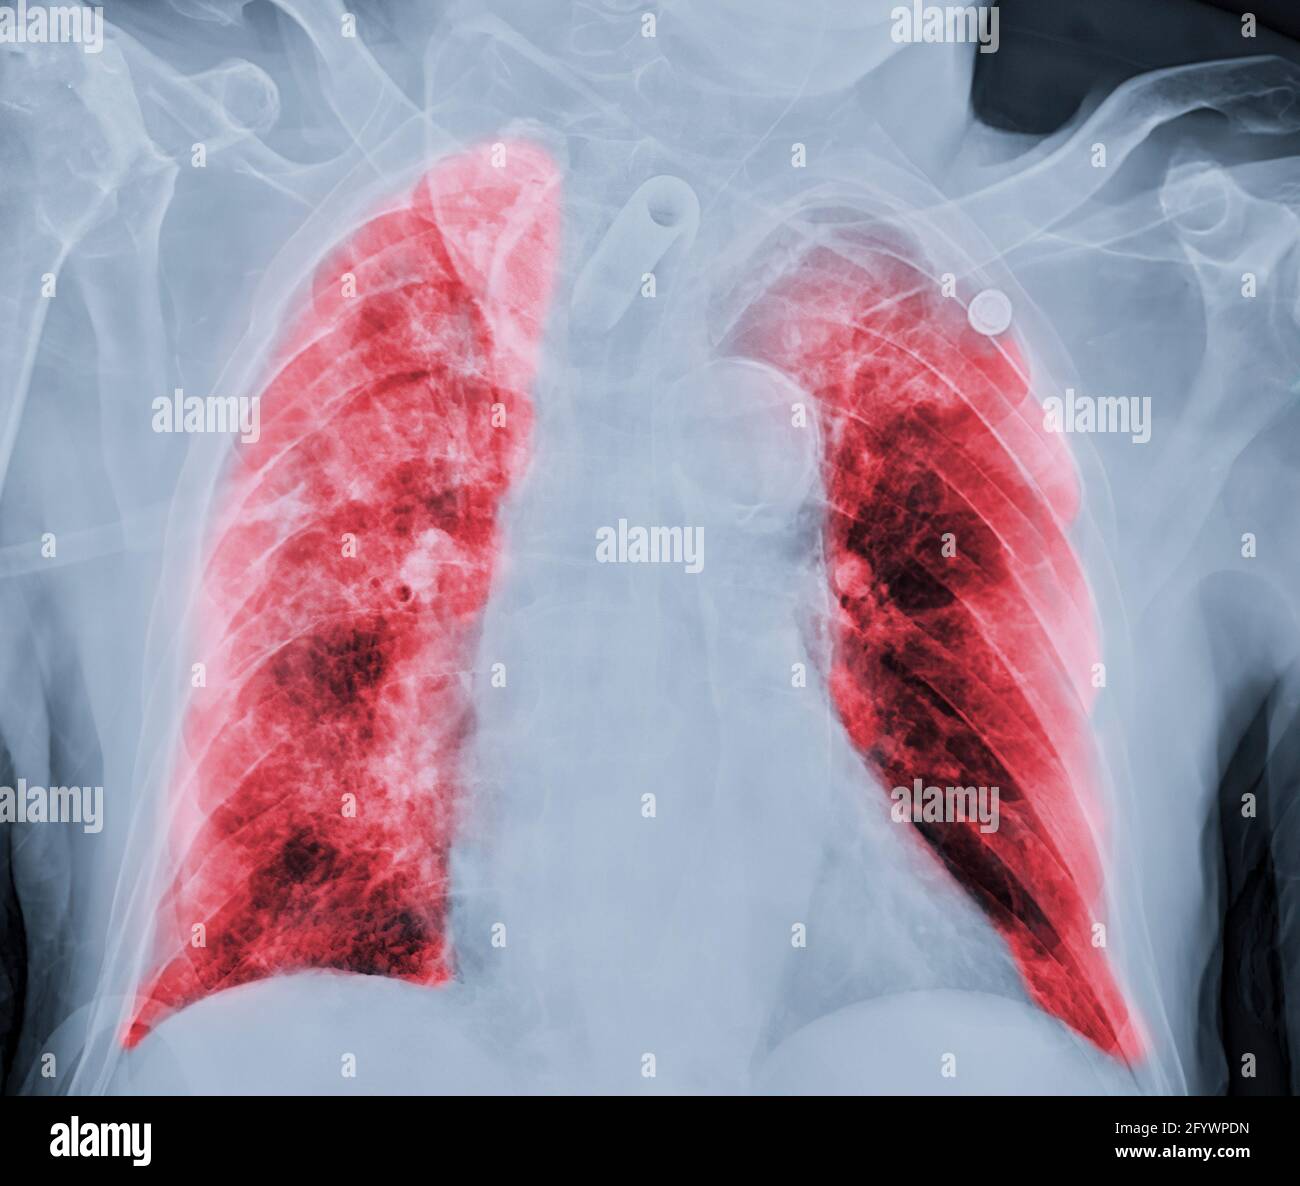 Chest X-ray or X-Ray Image Of Human Chest or Lung ( red zone ) showing tuberculosis  Tuberculosis (TB) and corona virus 2019 Stock Photo - Alamy